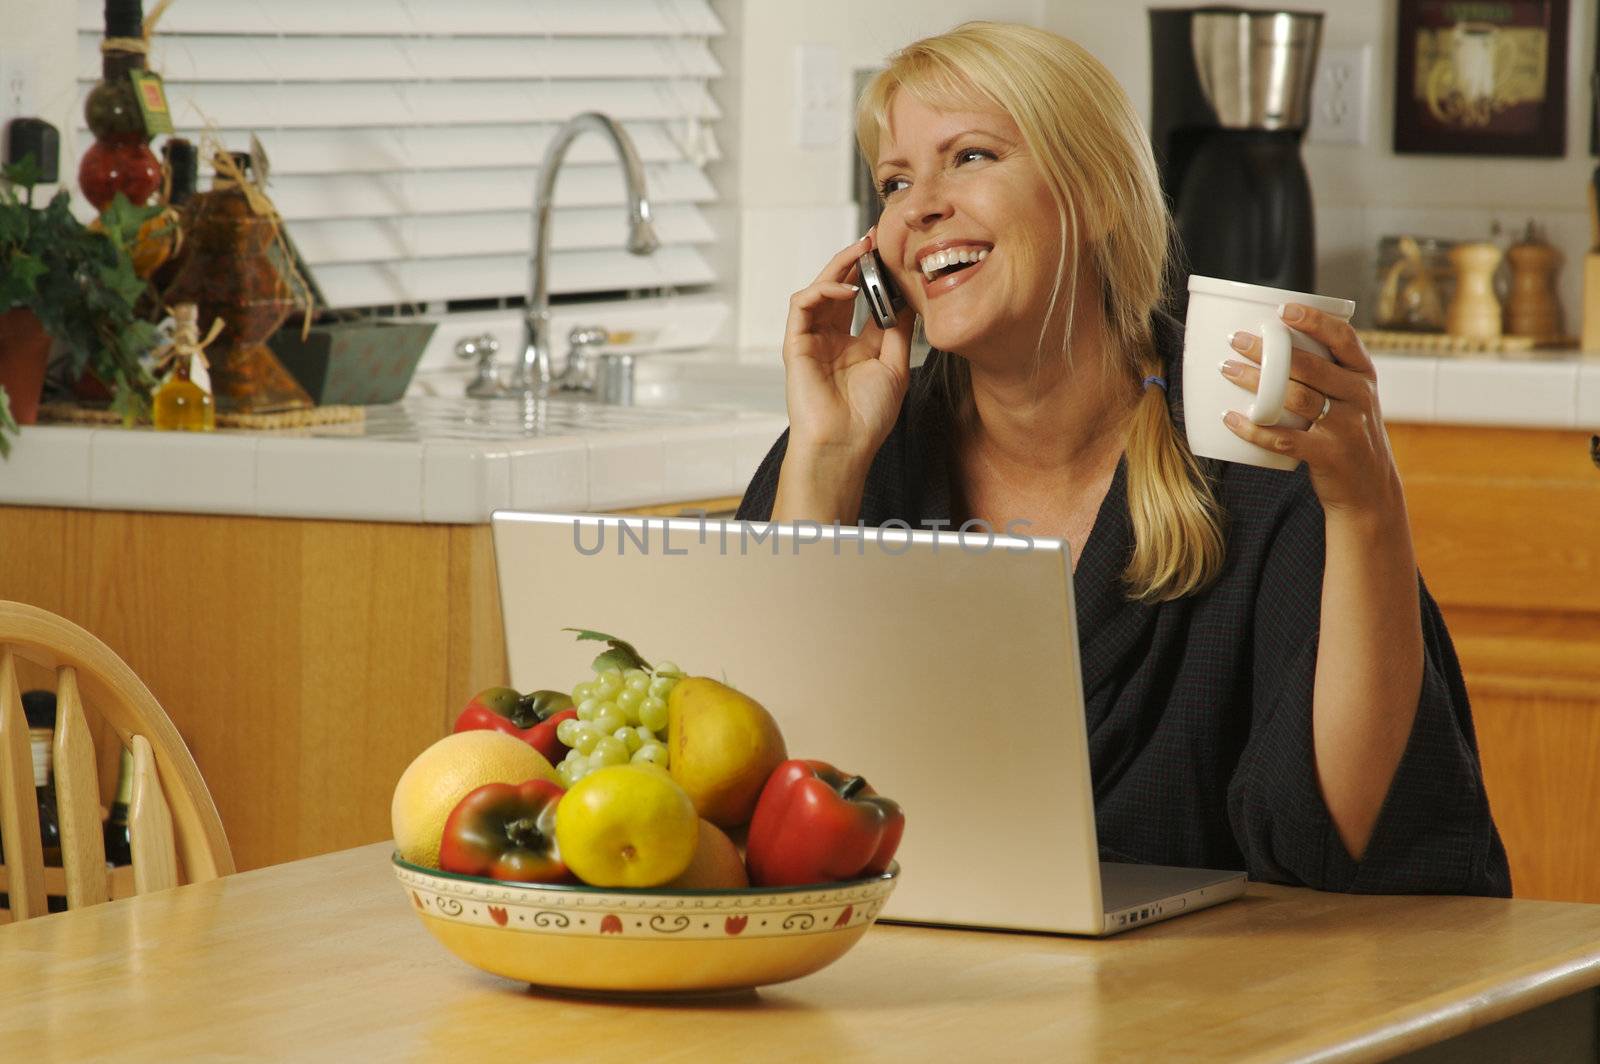 Woman smiling, in her kitchen on cell phone sitting in front of laptop.